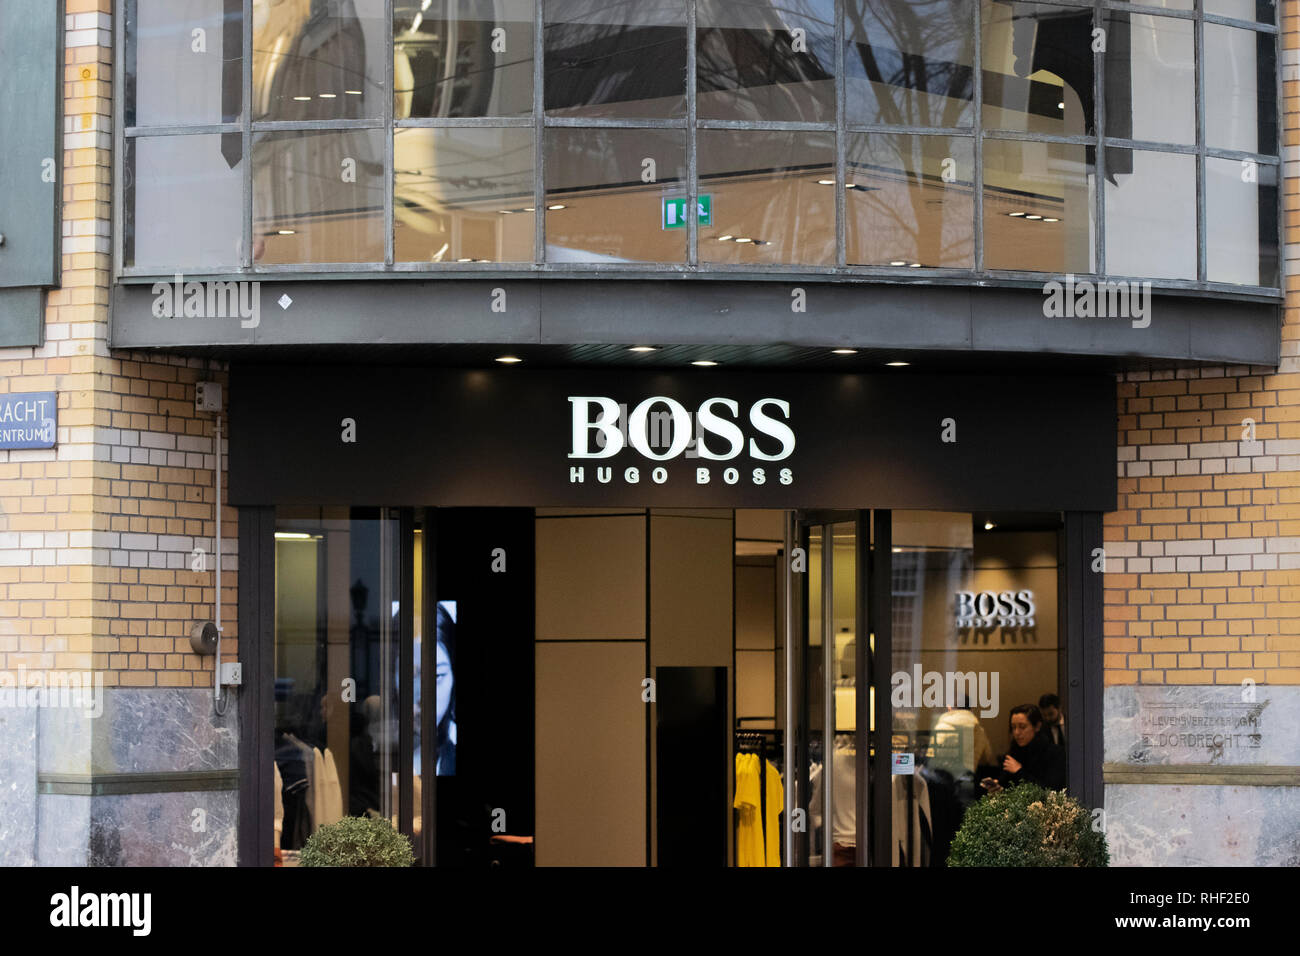 Hugo Boss Clothes High Resolution Stock Photography and Images - Alamy